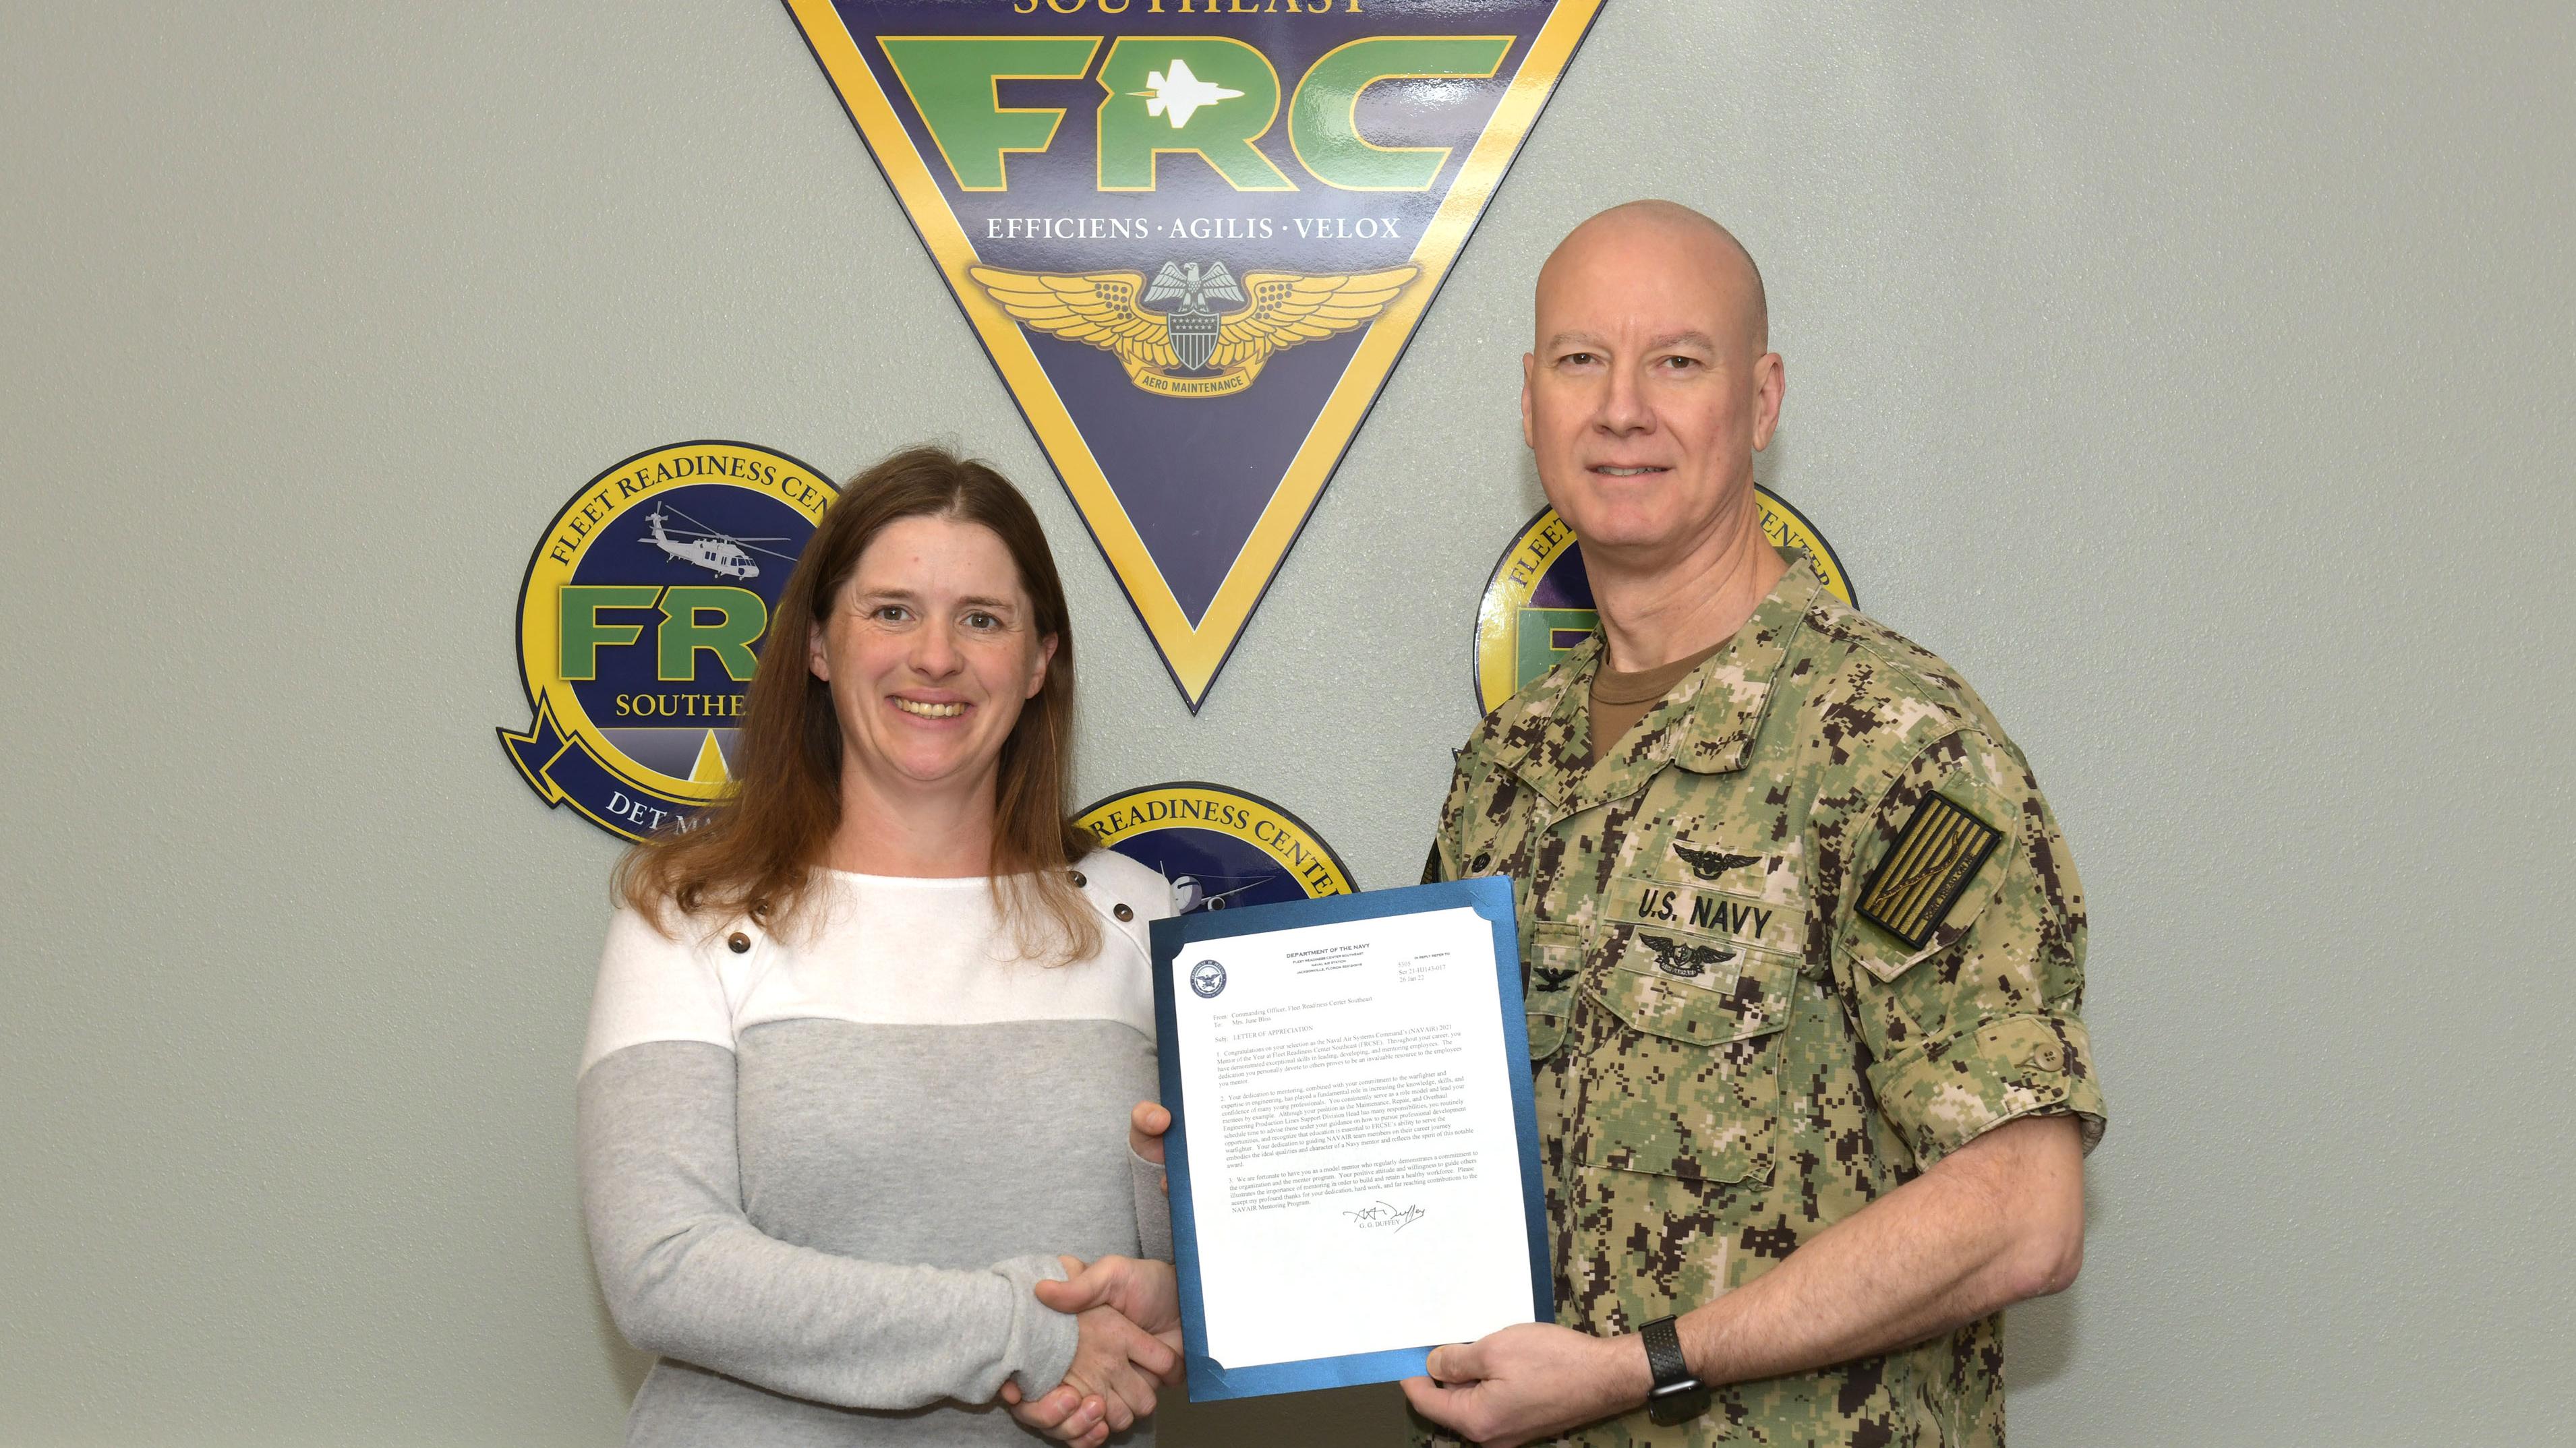 Fleet Readiness Center Southeast (FRCSE) recently announced their 2021 Naval Air Systems Command (NAVAIR) National Mentor of the Year Award winner as well as the recipients for the FRCSE Dora Quinlan Mentor Award.